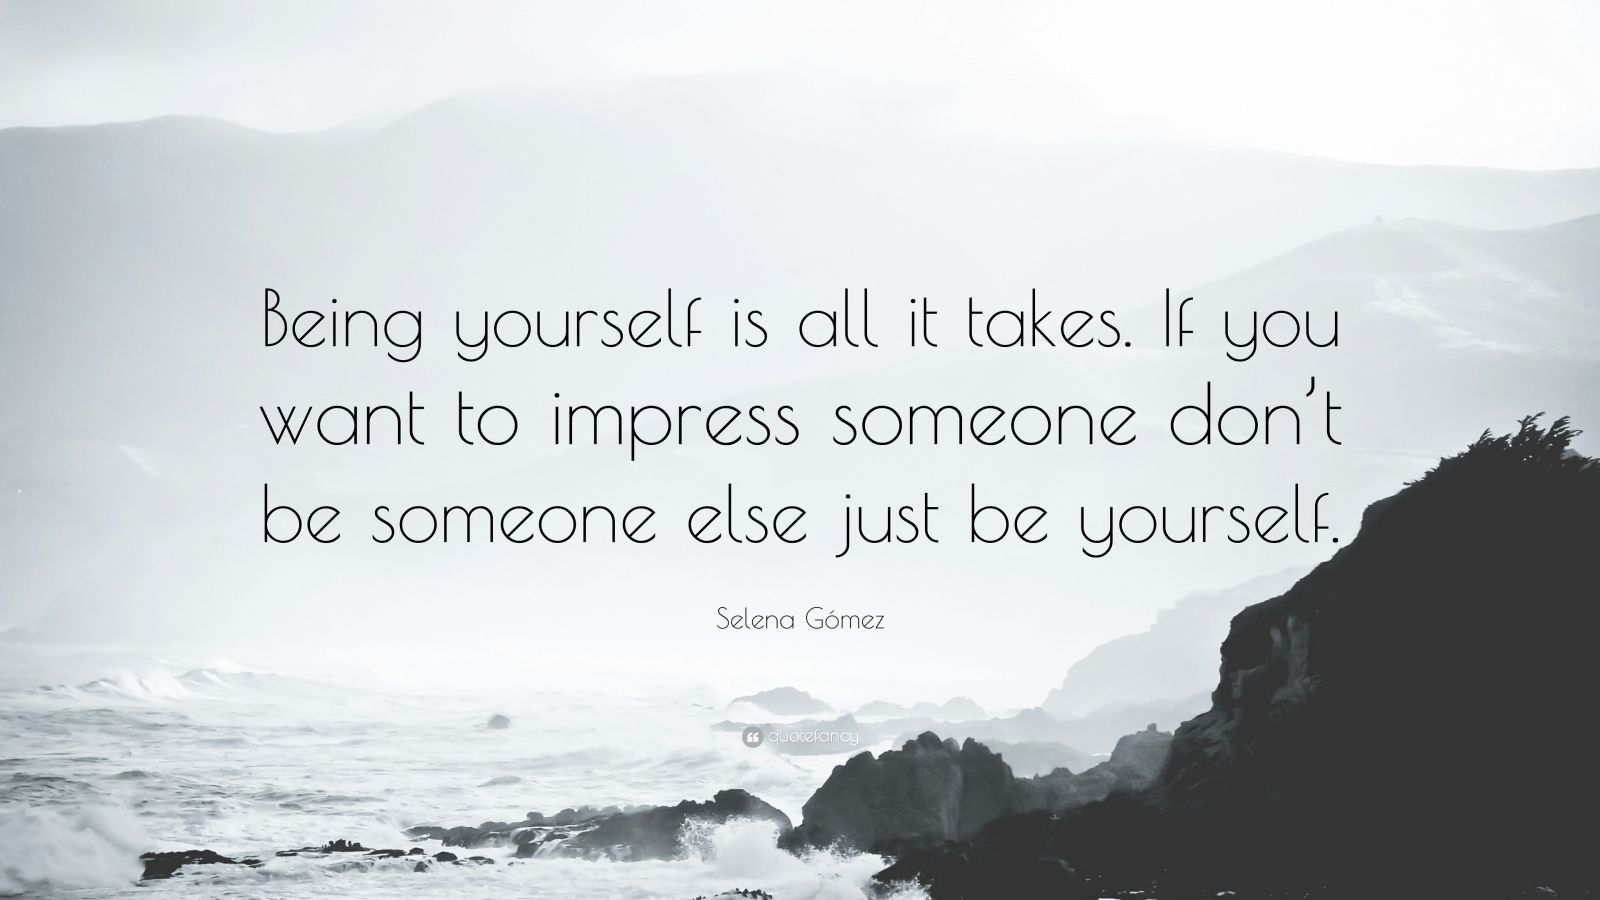 Selena Gómez Quote: “Being yourself is all it takes. If you want to ...